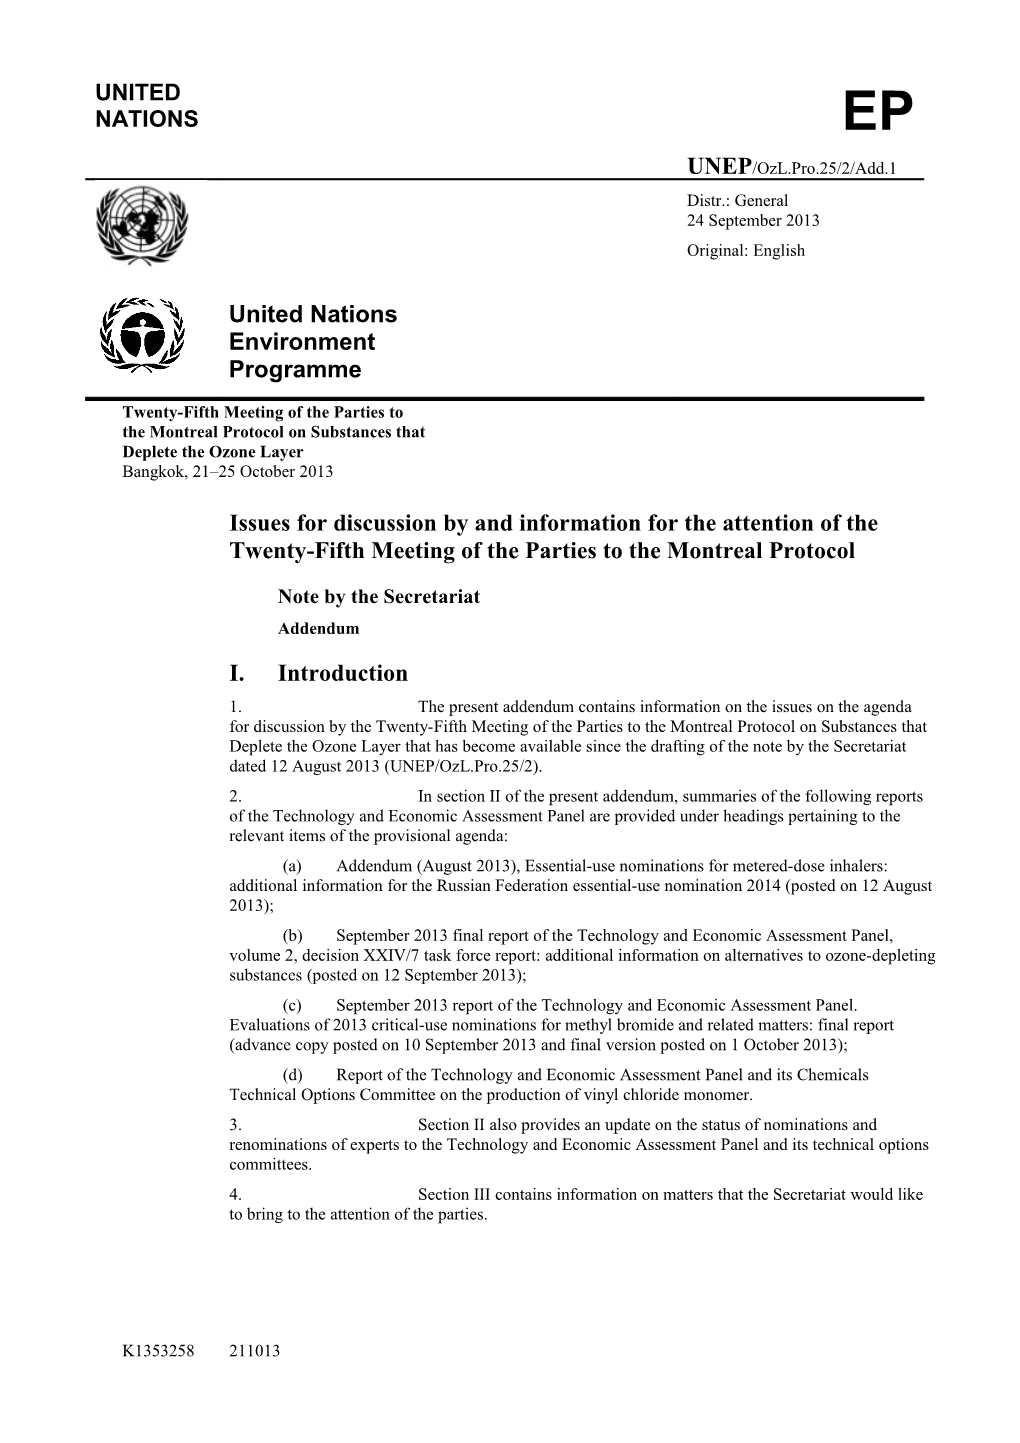 Issues for Discussion by and Information for the Attention of the Twenty-Fifth Meeting